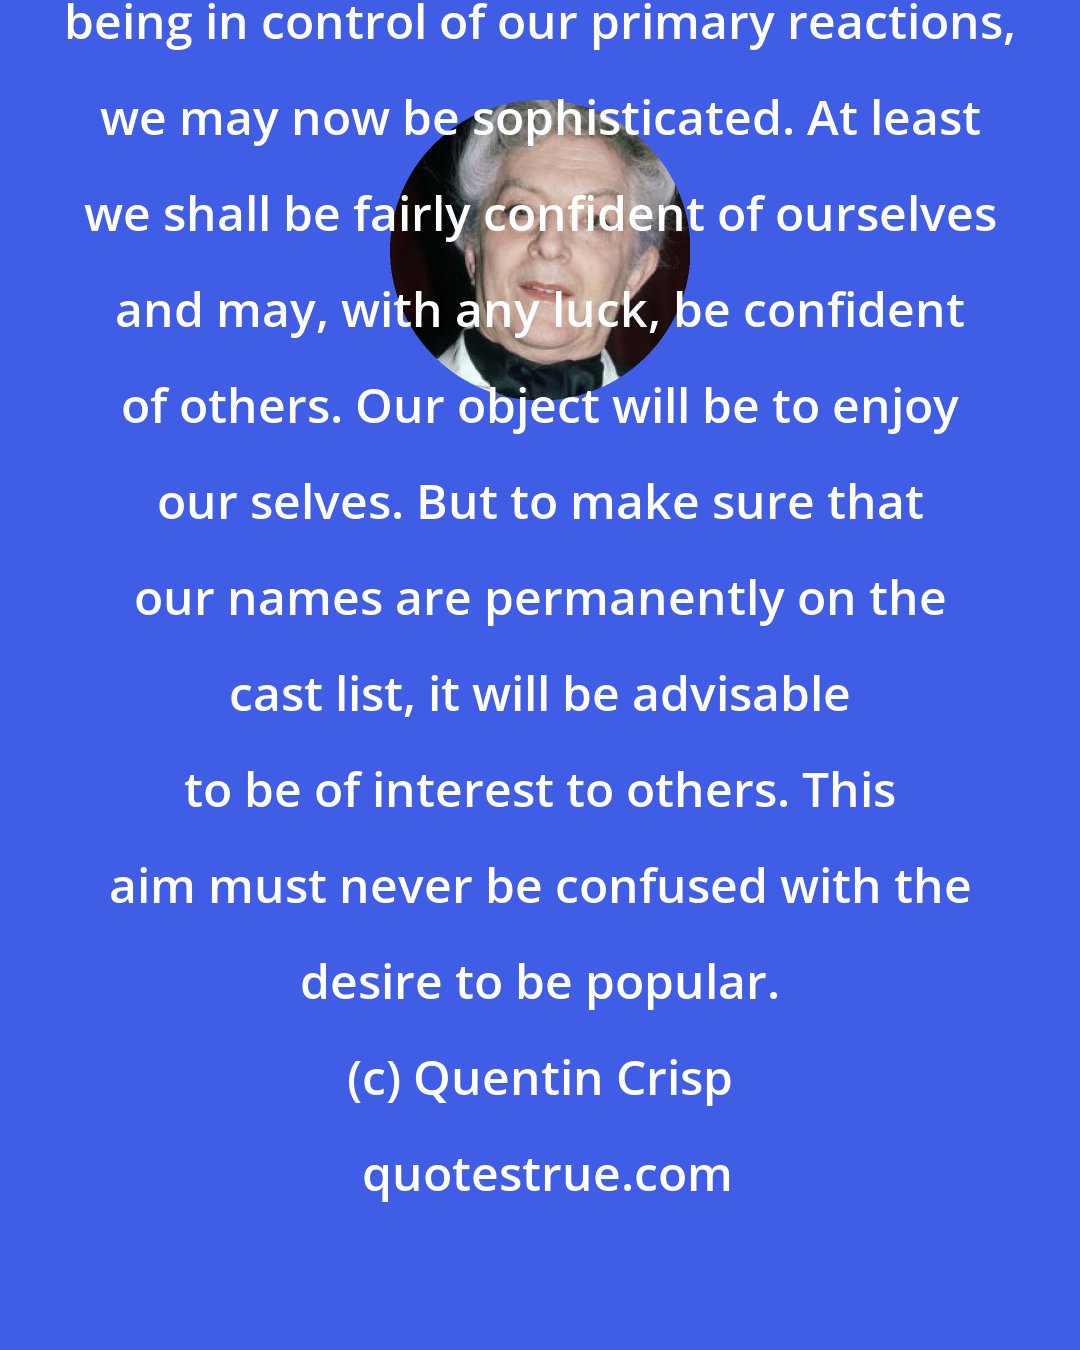 Quentin Crisp: If sophistication is a matter of being in control of our primary reactions, we may now be sophisticated. At least we shall be fairly confident of ourselves and may, with any luck, be confident of others. Our object will be to enjoy our selves. But to make sure that our names are permanently on the cast list, it will be advisable to be of interest to others. This aim must never be confused with the desire to be popular.